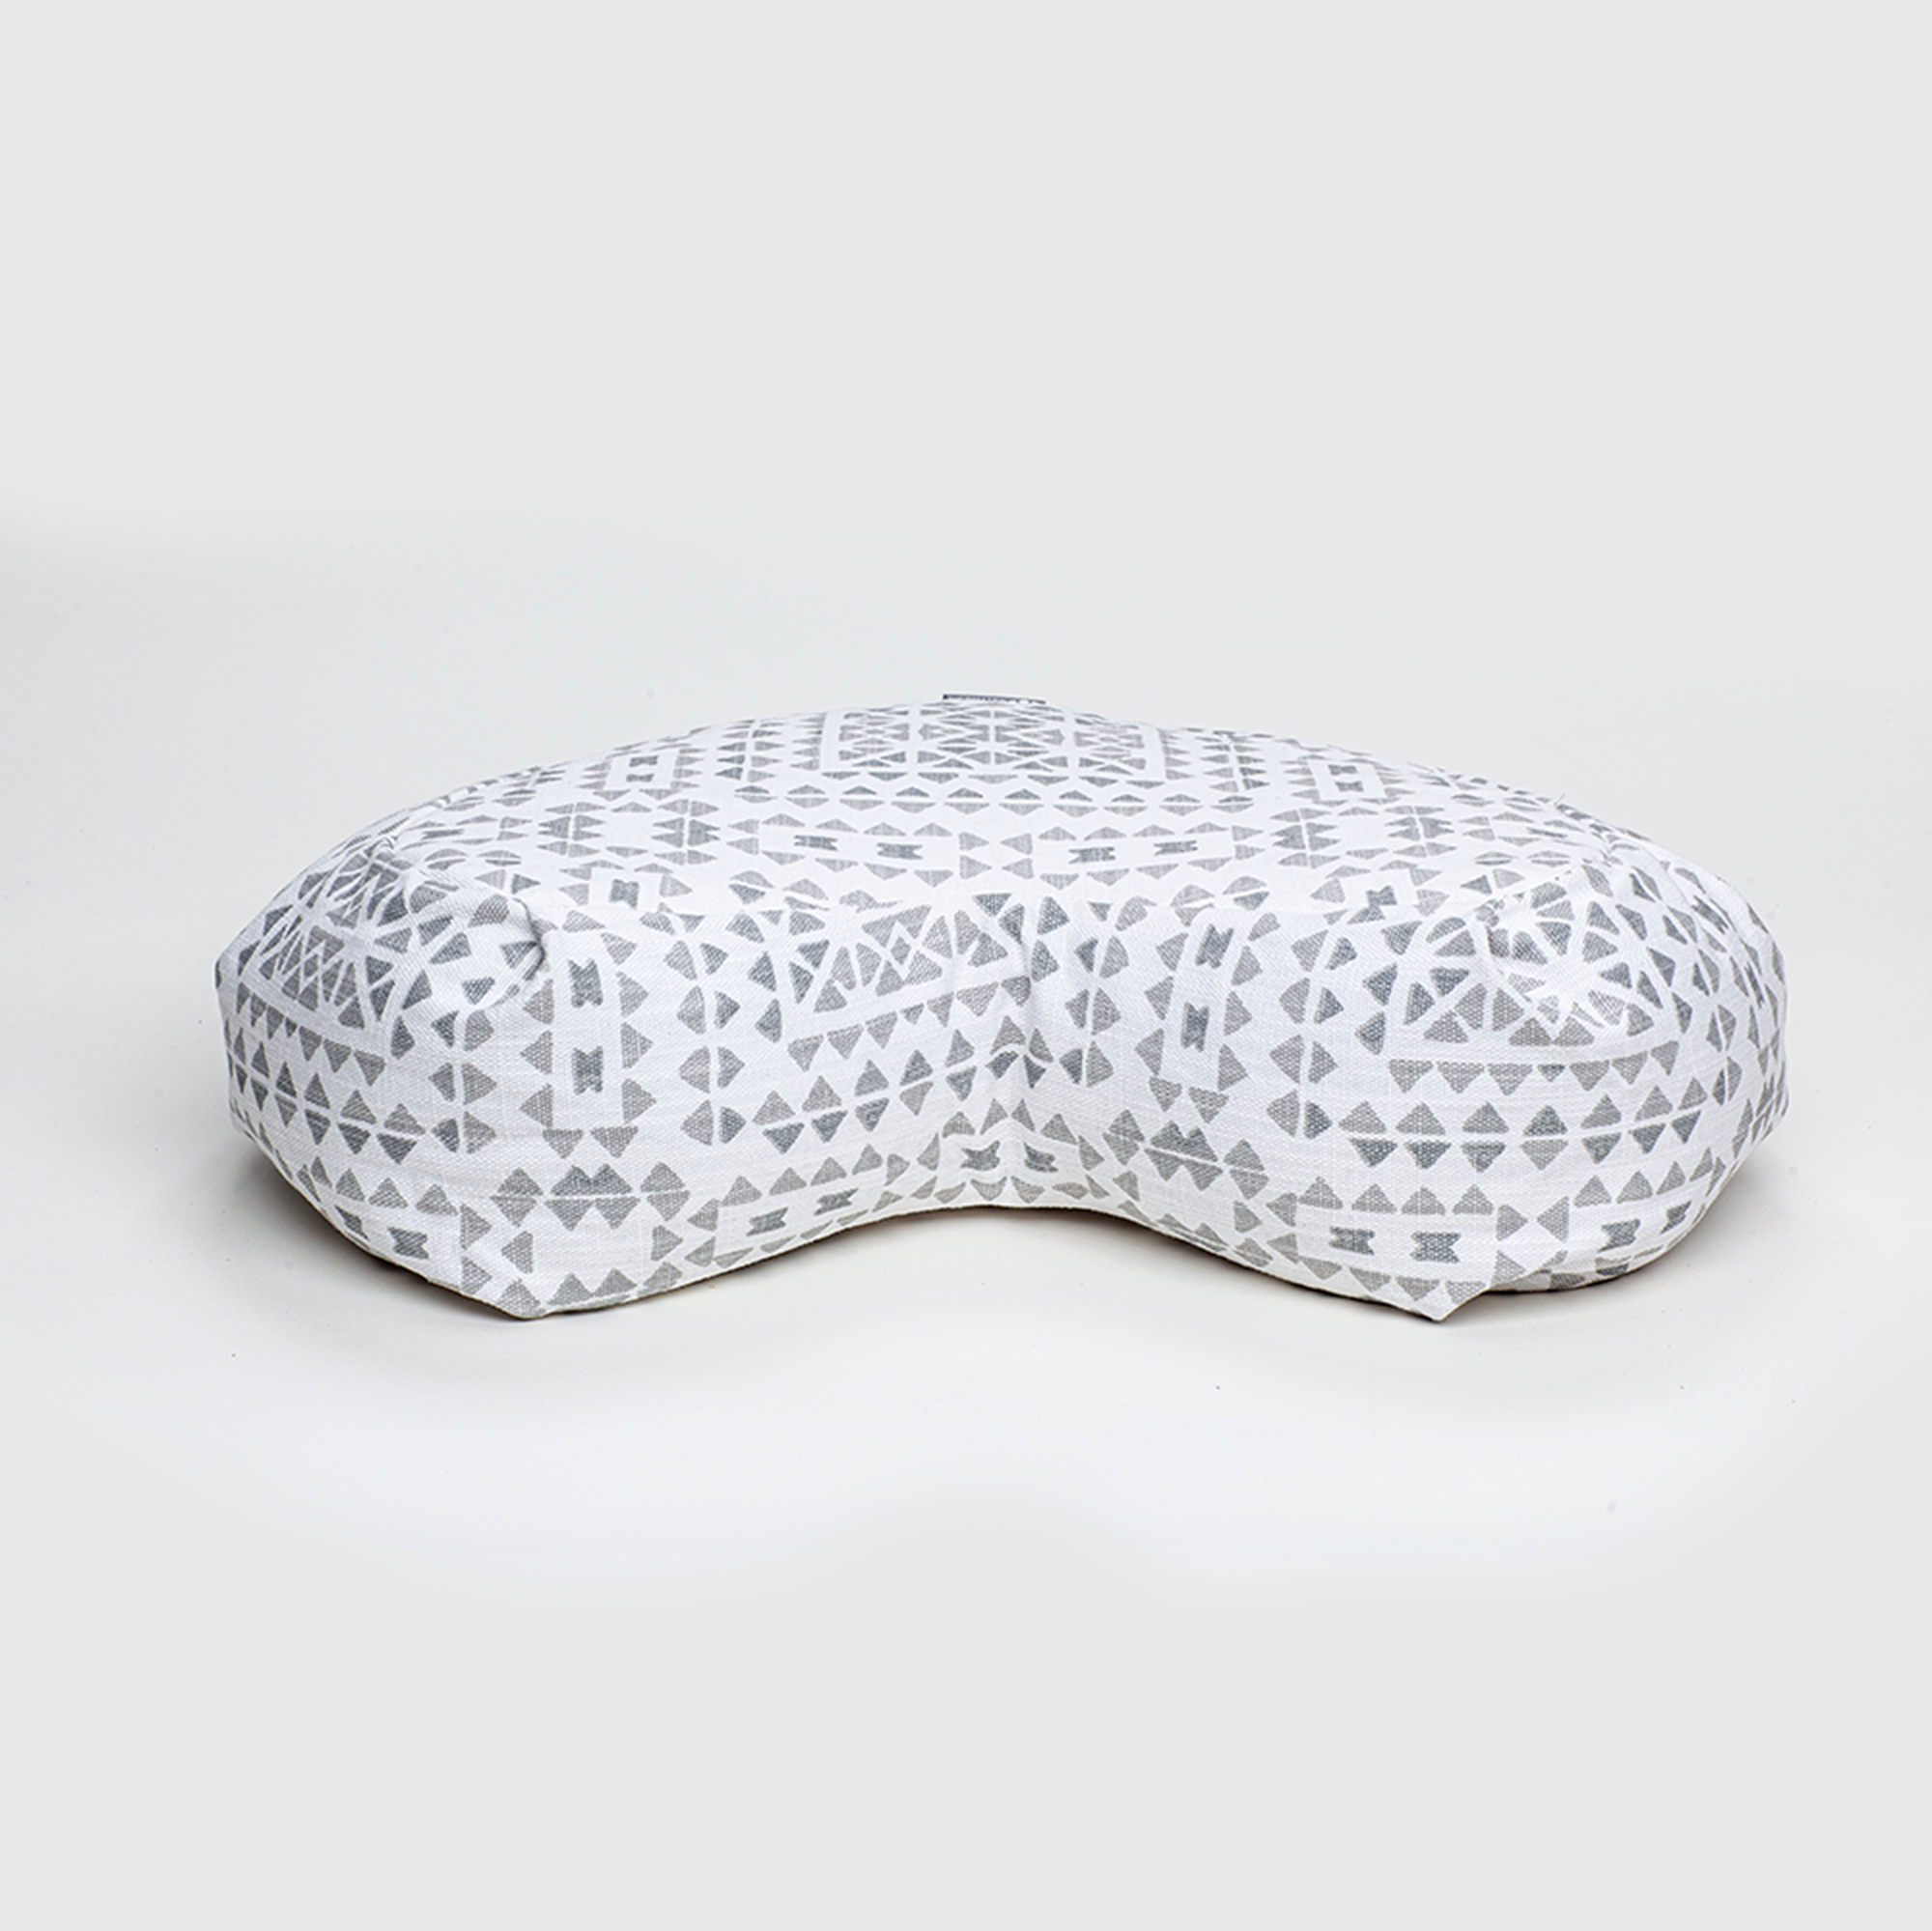 Meditation cushions: the best to help you find your zen in 2023